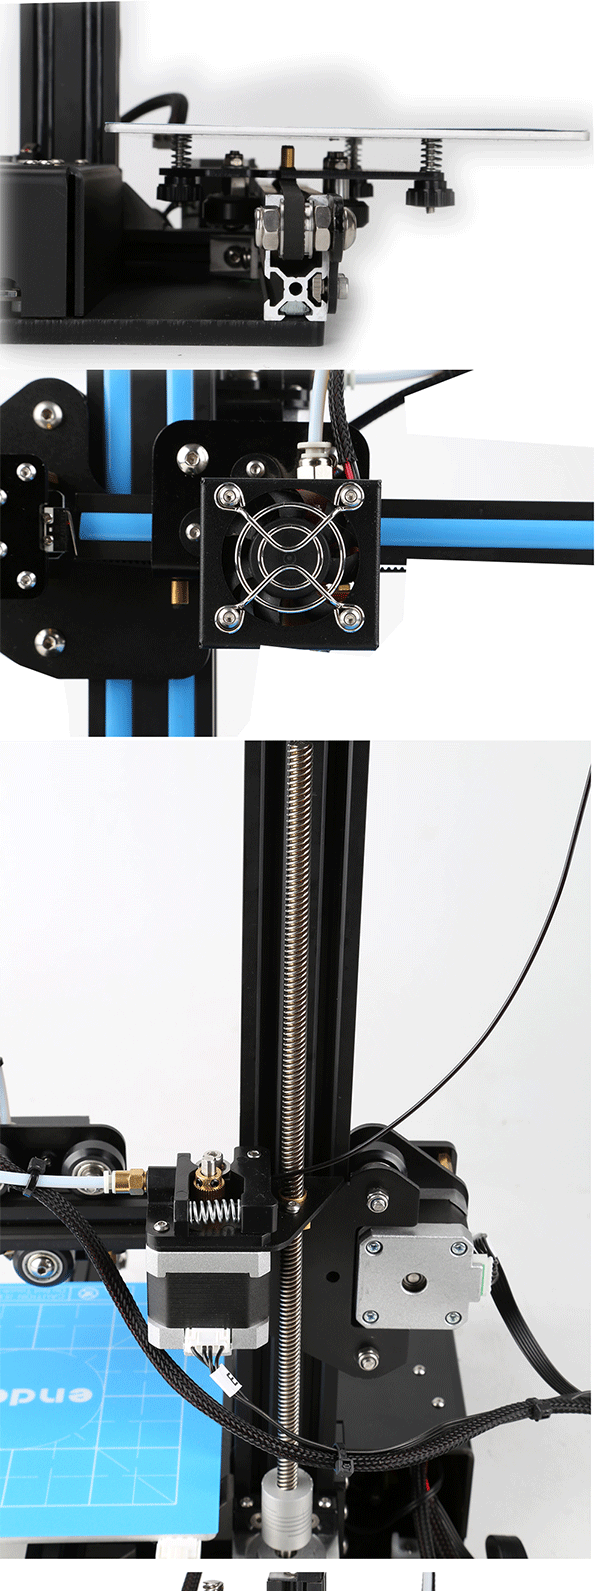 Creality 3D® Ender-2 DIY 3D Printer Kit 150*150*200mm Printing Size With Auto Leveling 1.75mm 0.4mm Nozzle 25